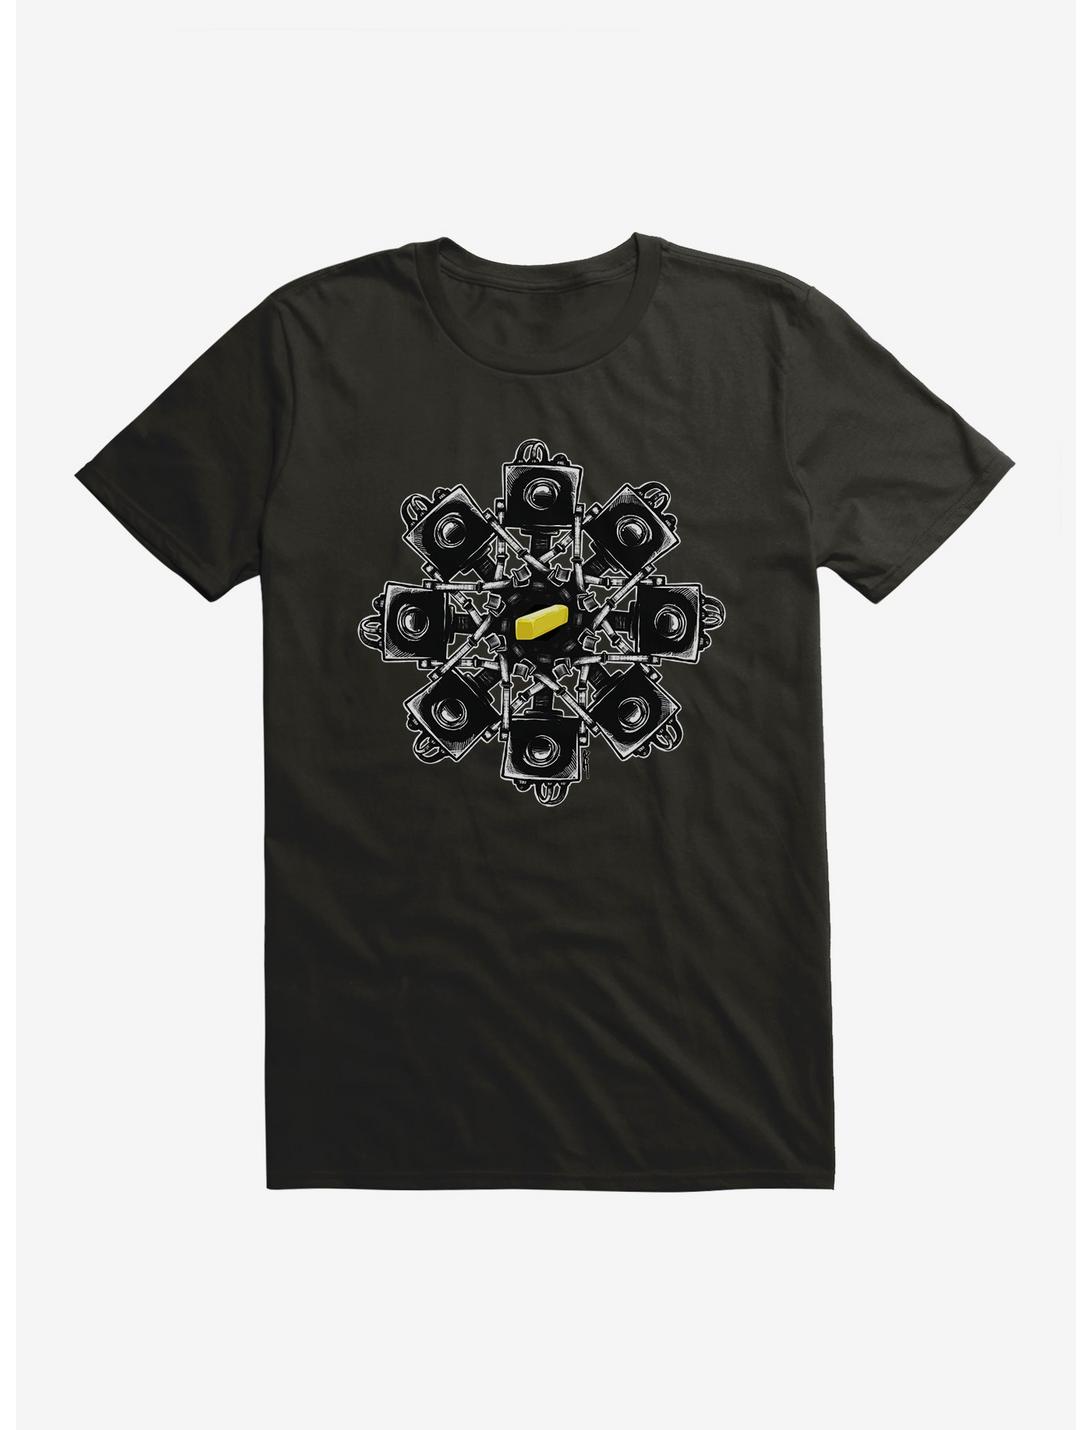 Rick And Morty What Is Our Purpose? T-Shirt, BLACK, hi-res